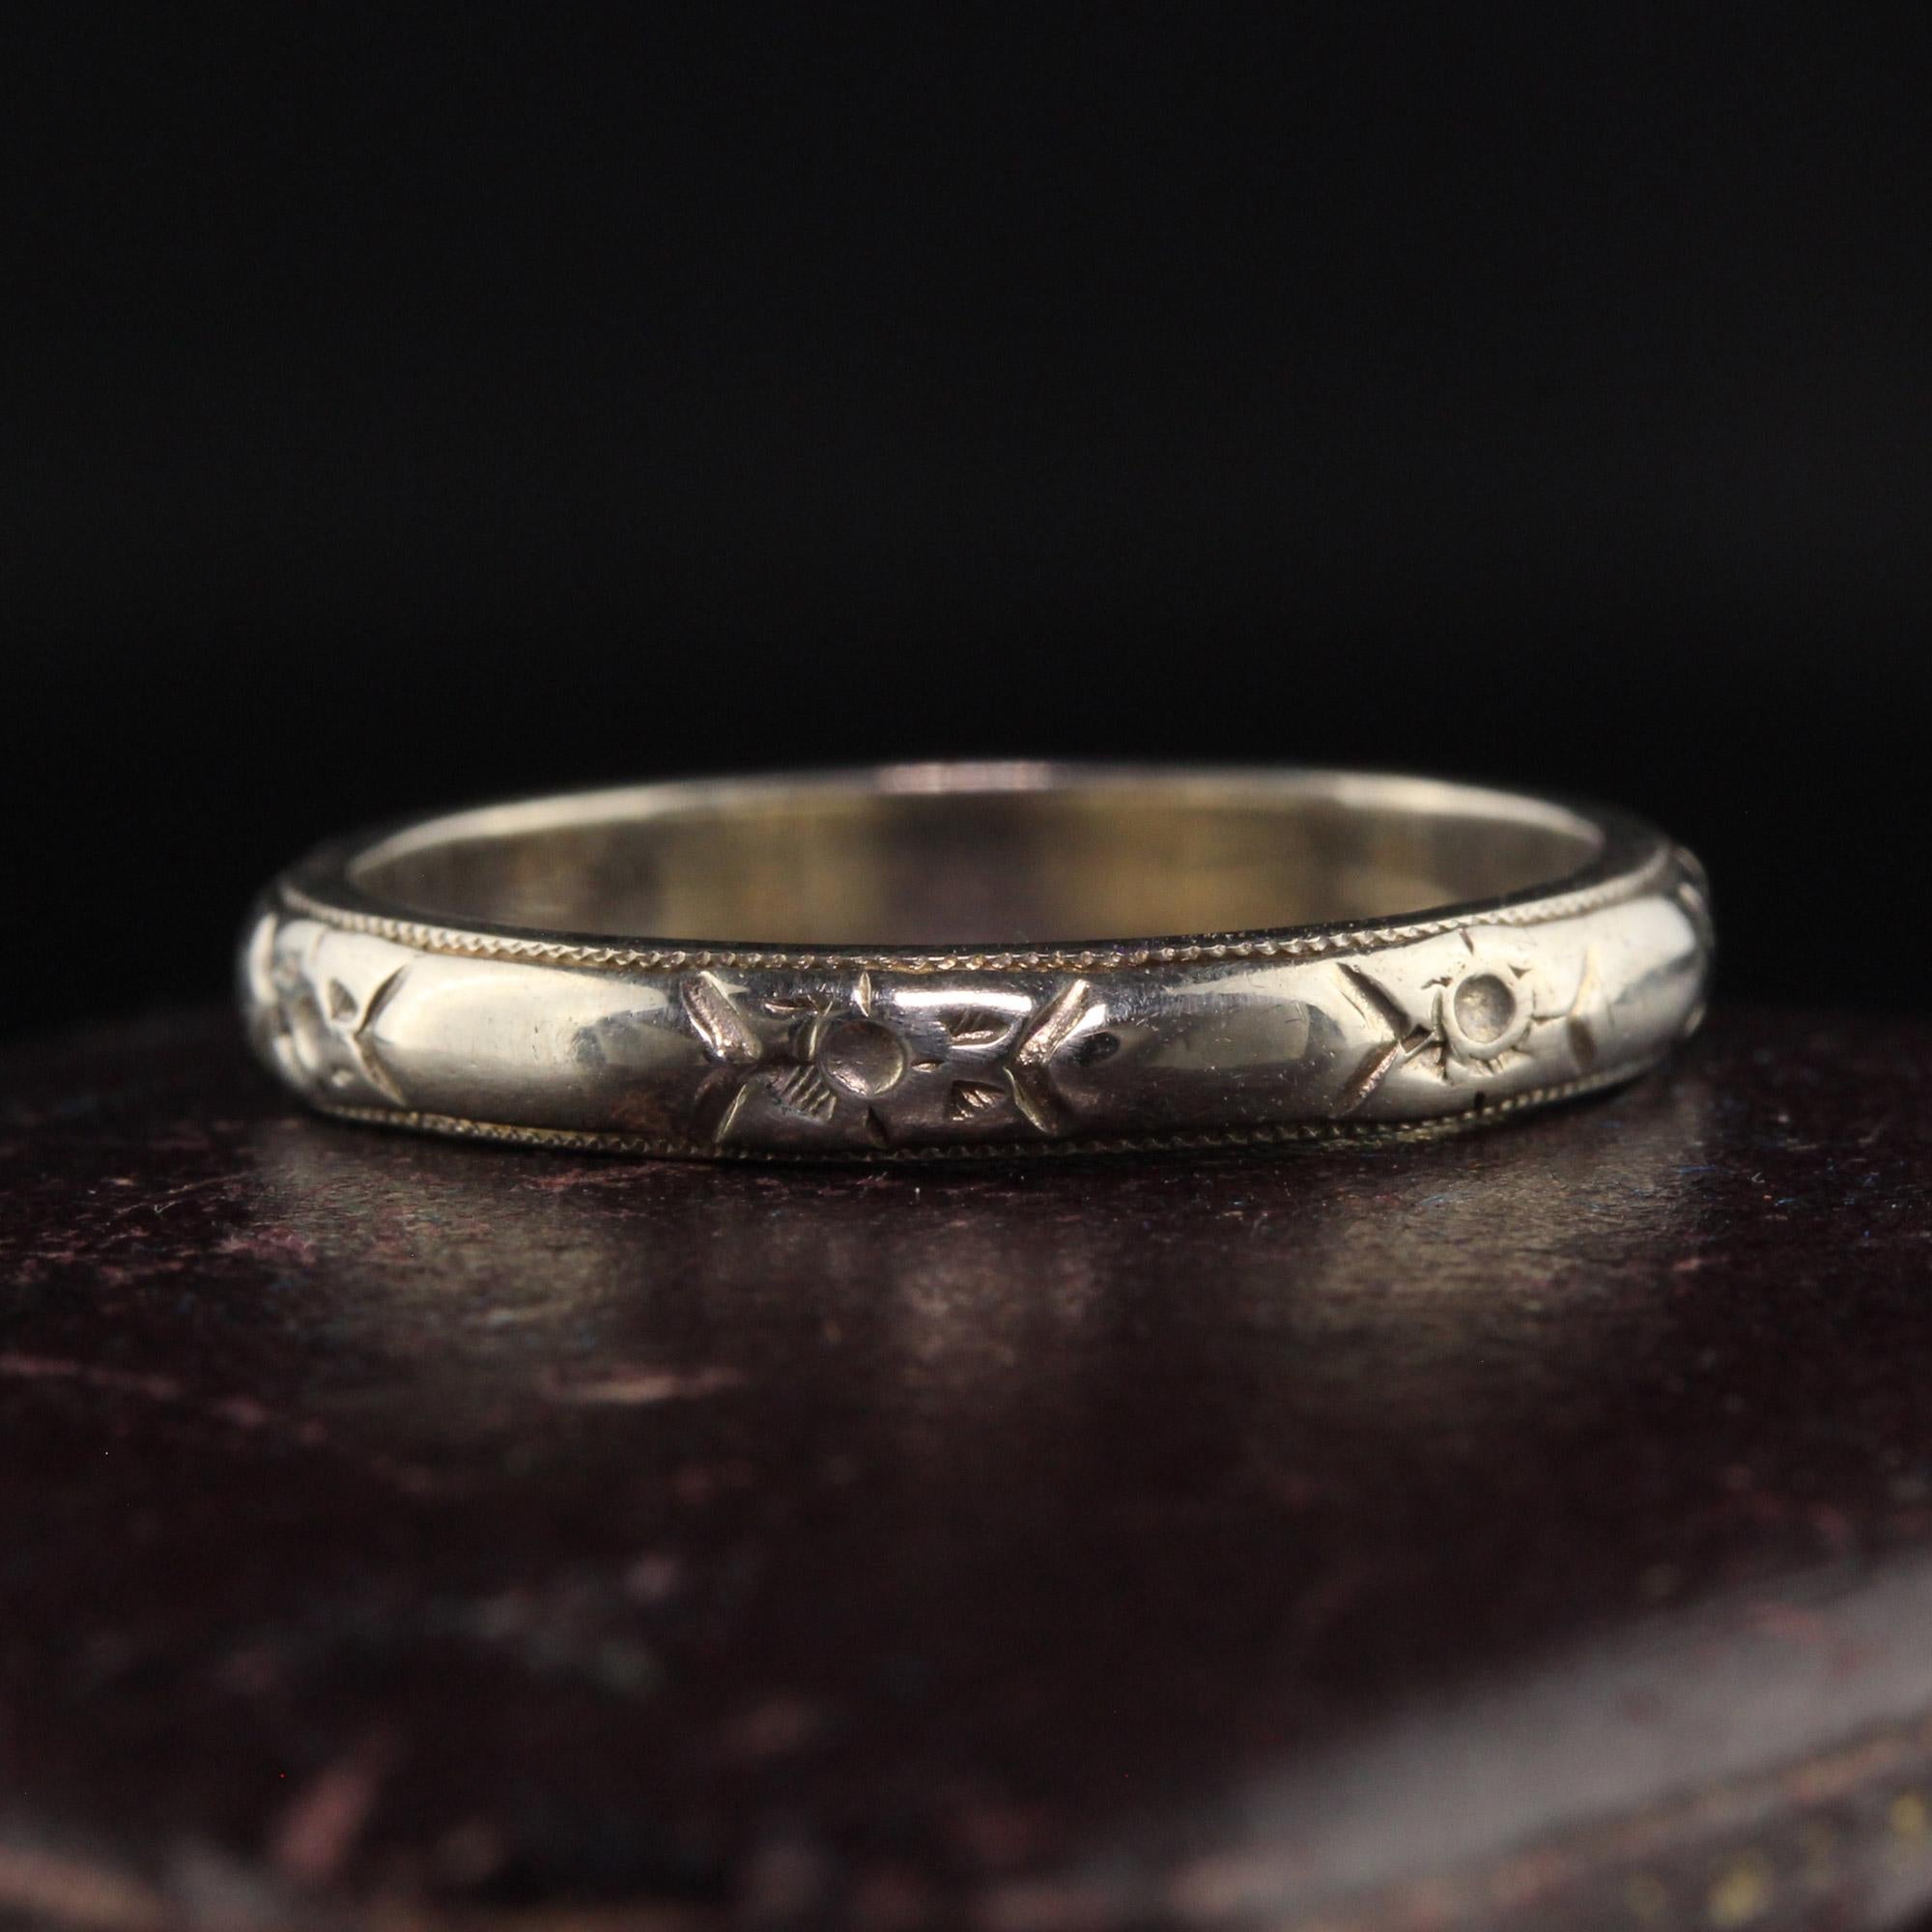 Beautiful Antique Art Deco 14K White Gold Blossom Engraved Wedding Band. This incredible classic wedding band has blossom engravings around the entire band.

Item #R1136

Metal: 14K White Gold

Weight: 2.1 Grams

Size: 4 1/2

Measurements: Top of